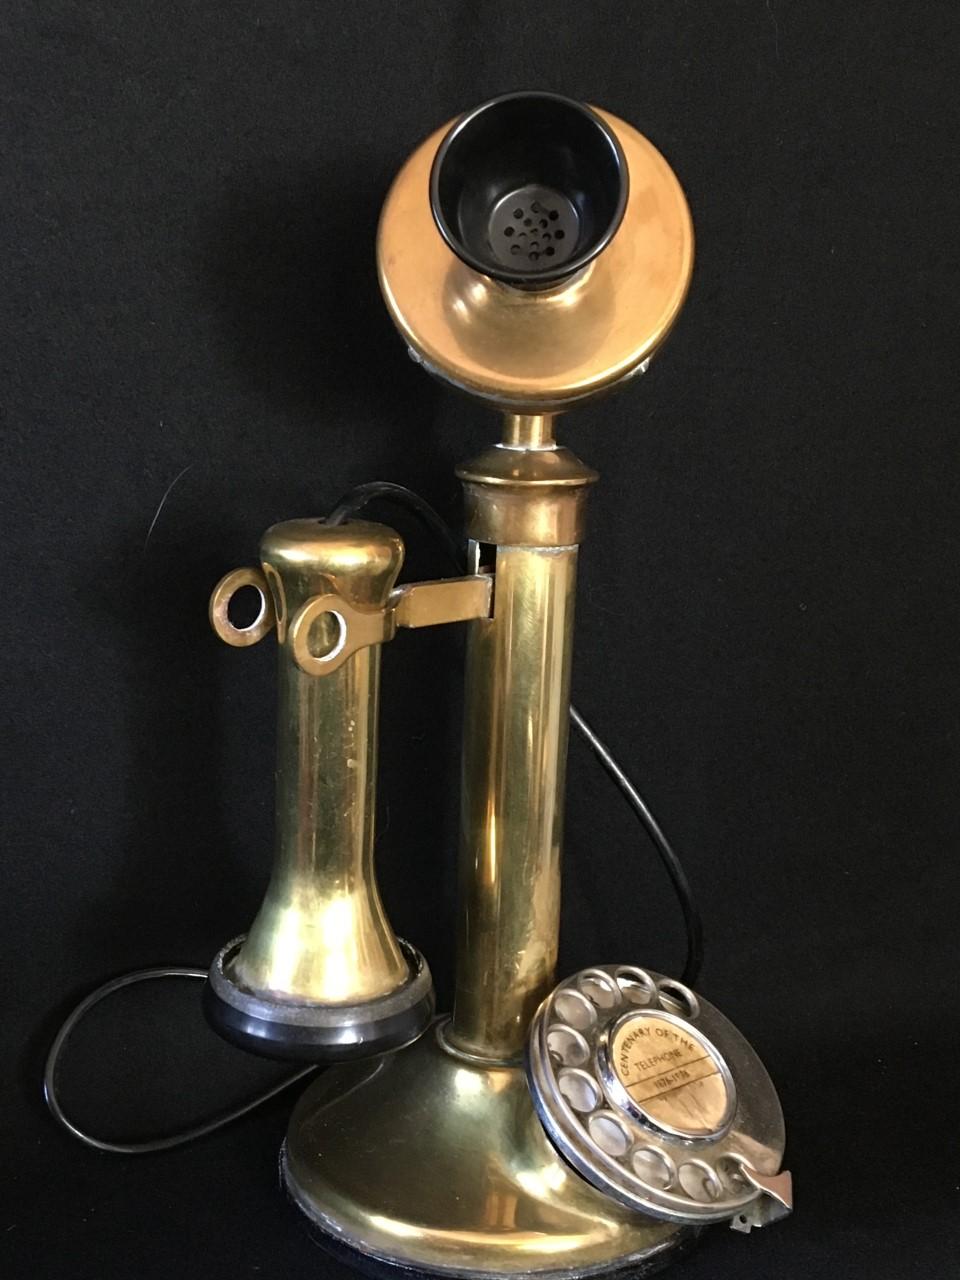 Attractive brass telephone, issued in 1976 to commemorate the 